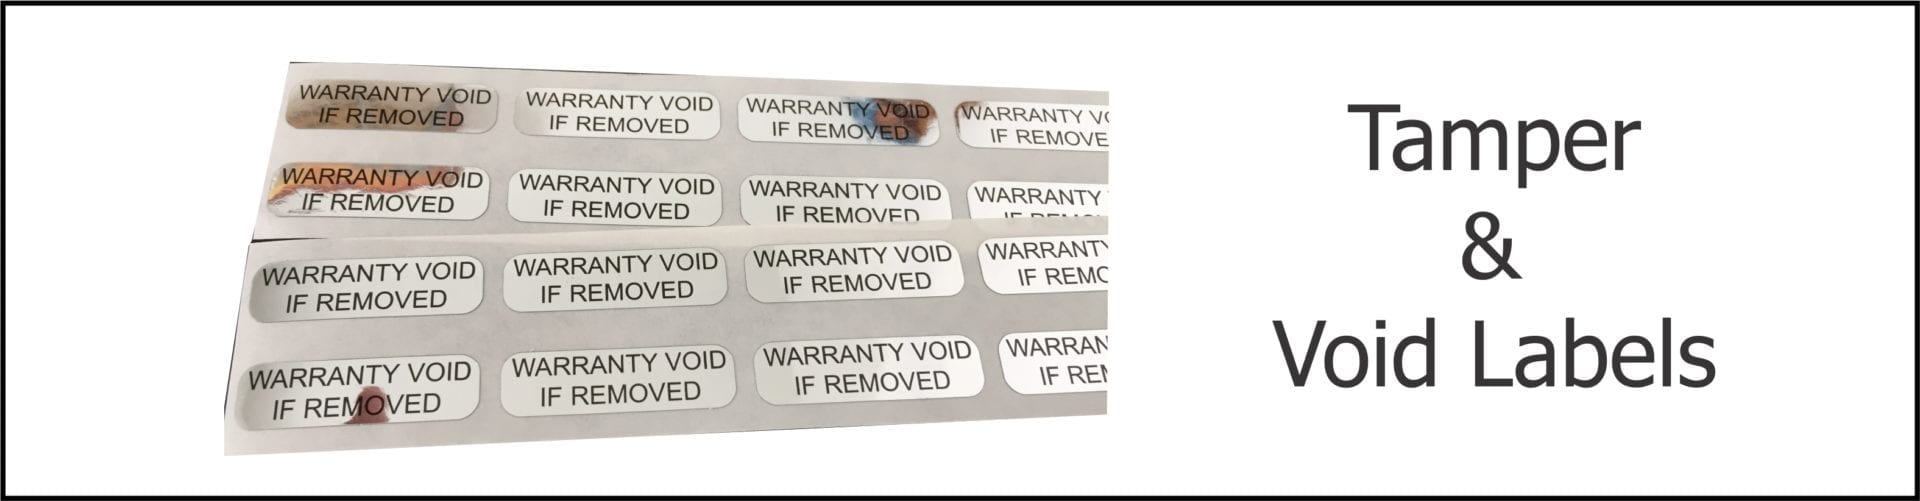 tamper and void labels | Strong Asset Tags